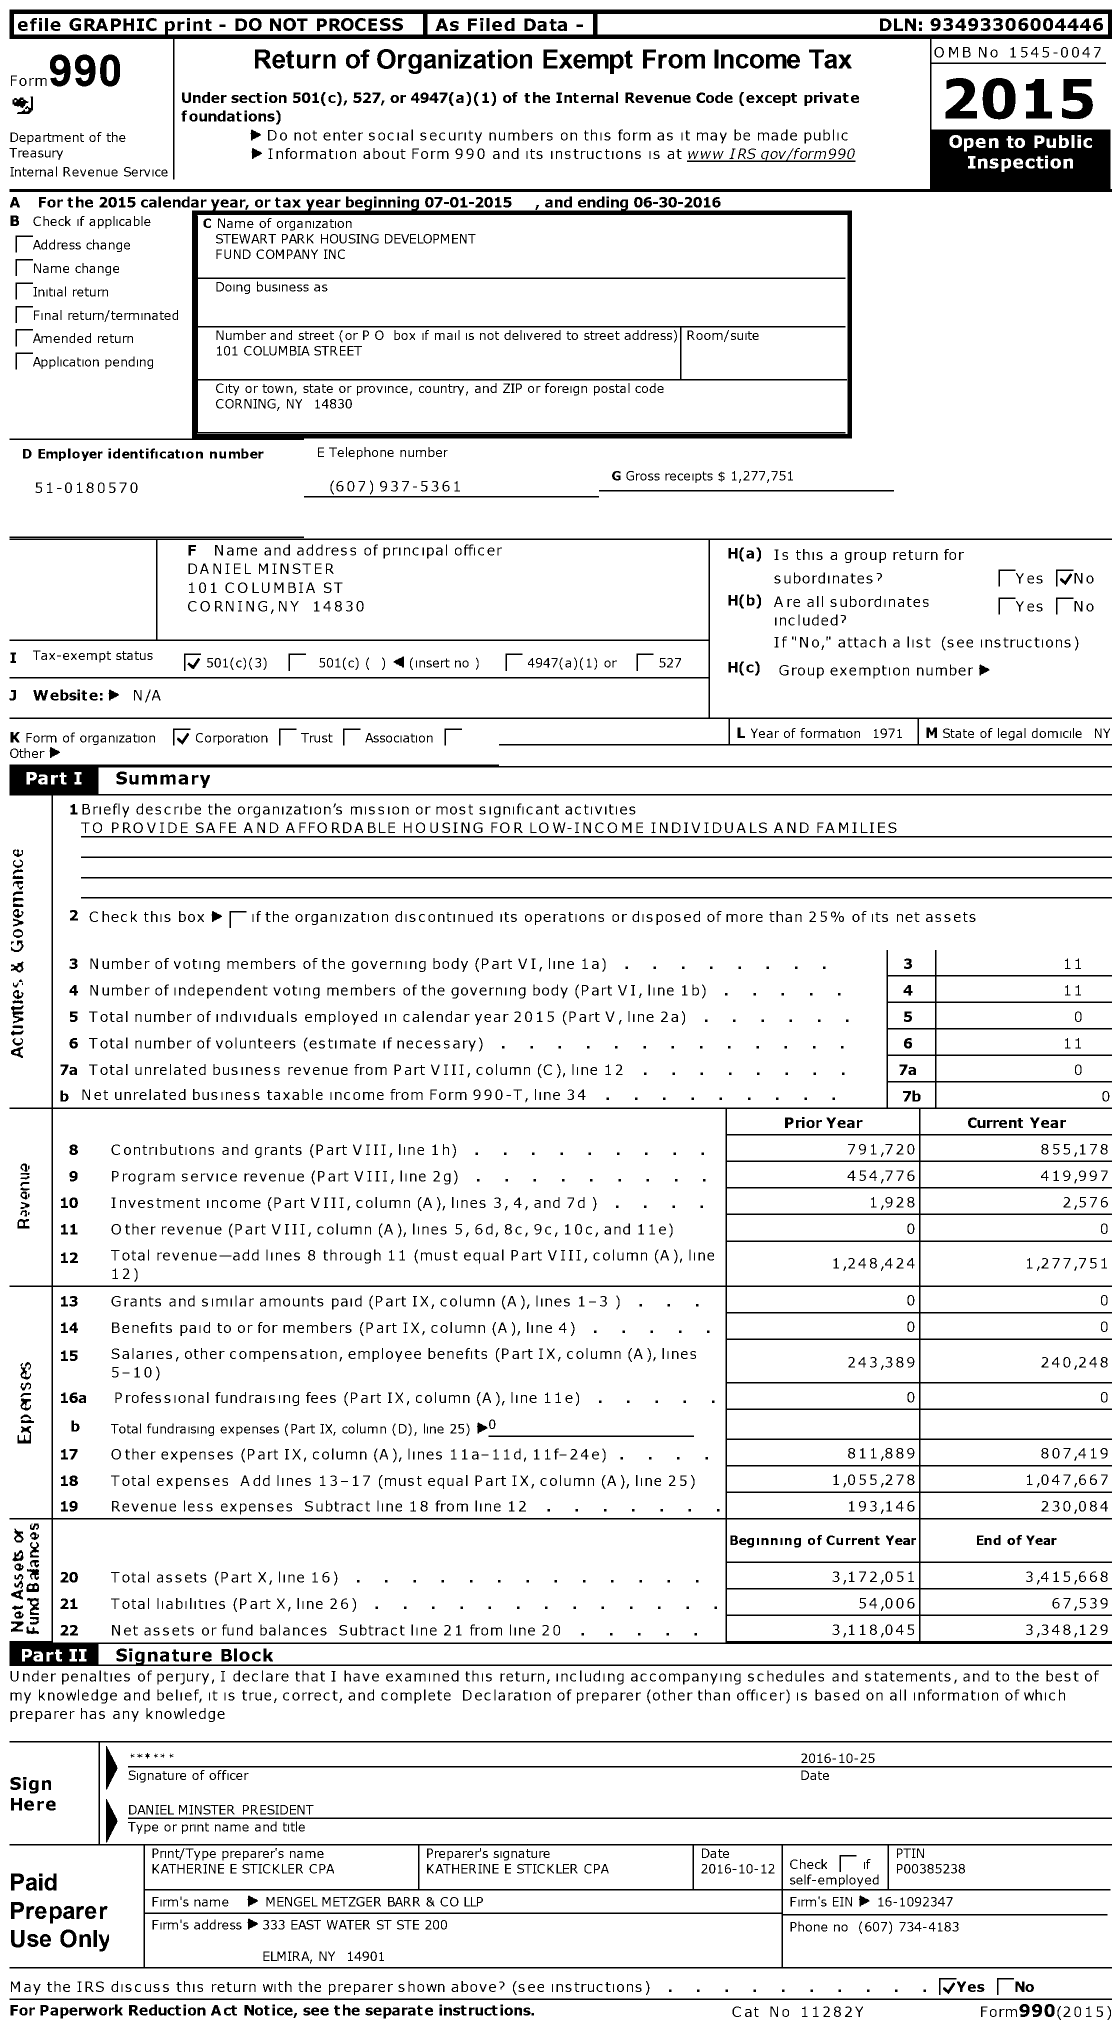 Image of first page of 2015 Form 990 for Stewart Park Housing Development Fund Company